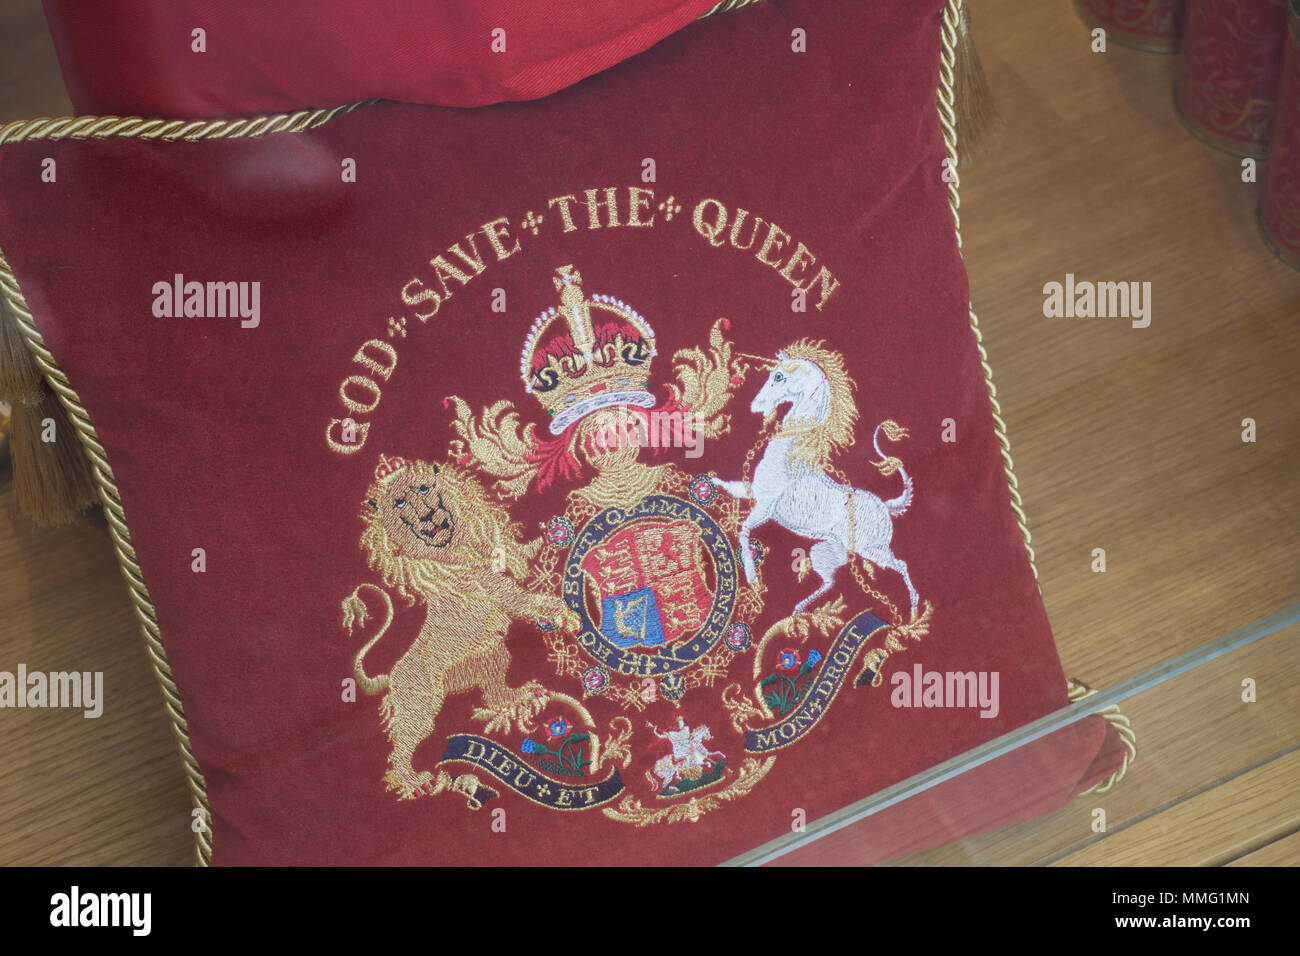 LONDON, UK - MAY 11th 2018: God save the Queen souvenir pillow from the Buckingham Palace shop Stock Photo